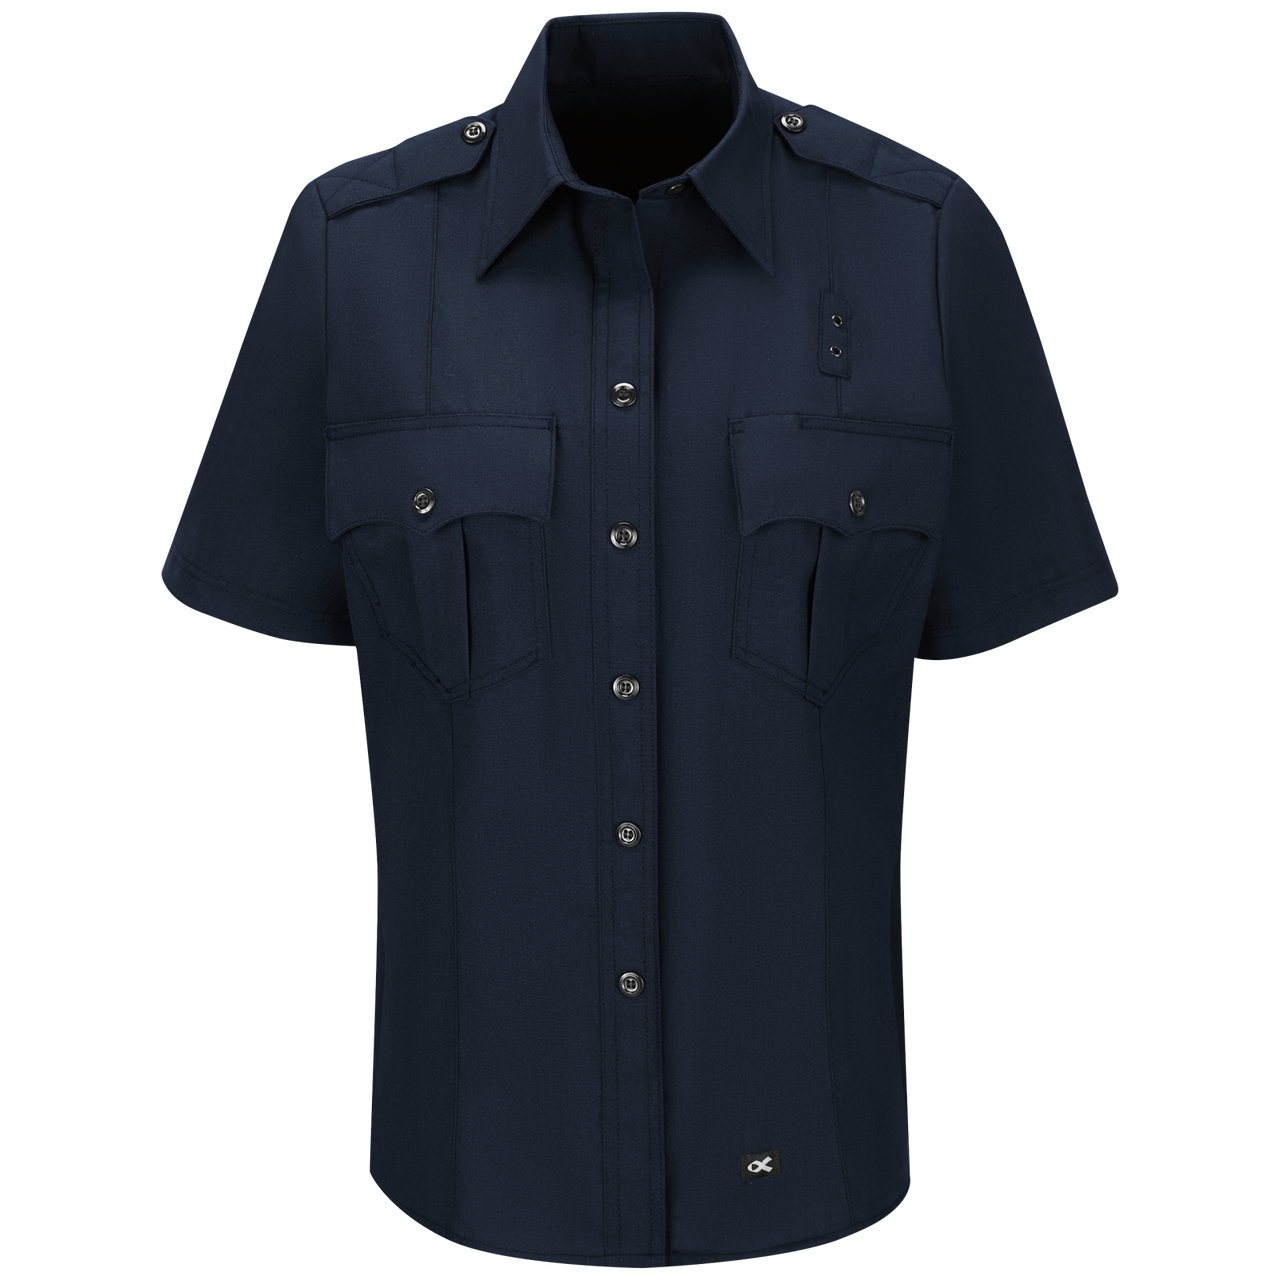 Workrite Women's Classic Fire Officer Shirt (FSE3) |  The Fire Center | Fuego Fire Center | Store | FIREFIGHTER GEAR | FREE SHIPPING | Made with durable, flame-resistant Nomex® IIIA fabric and autoclaved with our proprietary PerfectPress® process to give you a professional appearance that lasts. Featuring details like lined, banded collars and reinforced stitching, designed to support your needs.